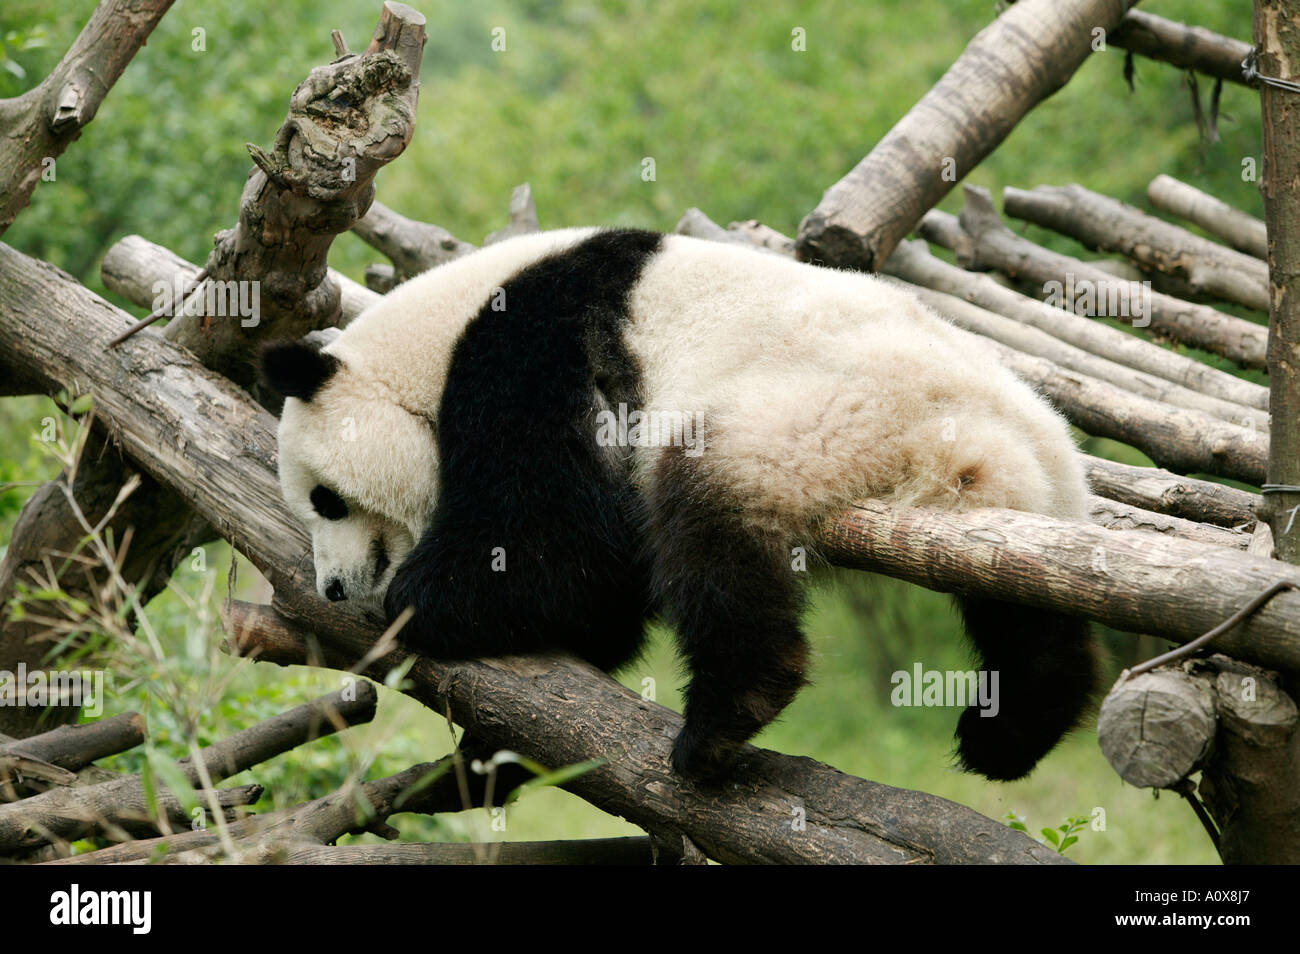 China Province Of Sichuan Town Of Chengdu Giant Panda At The Giant